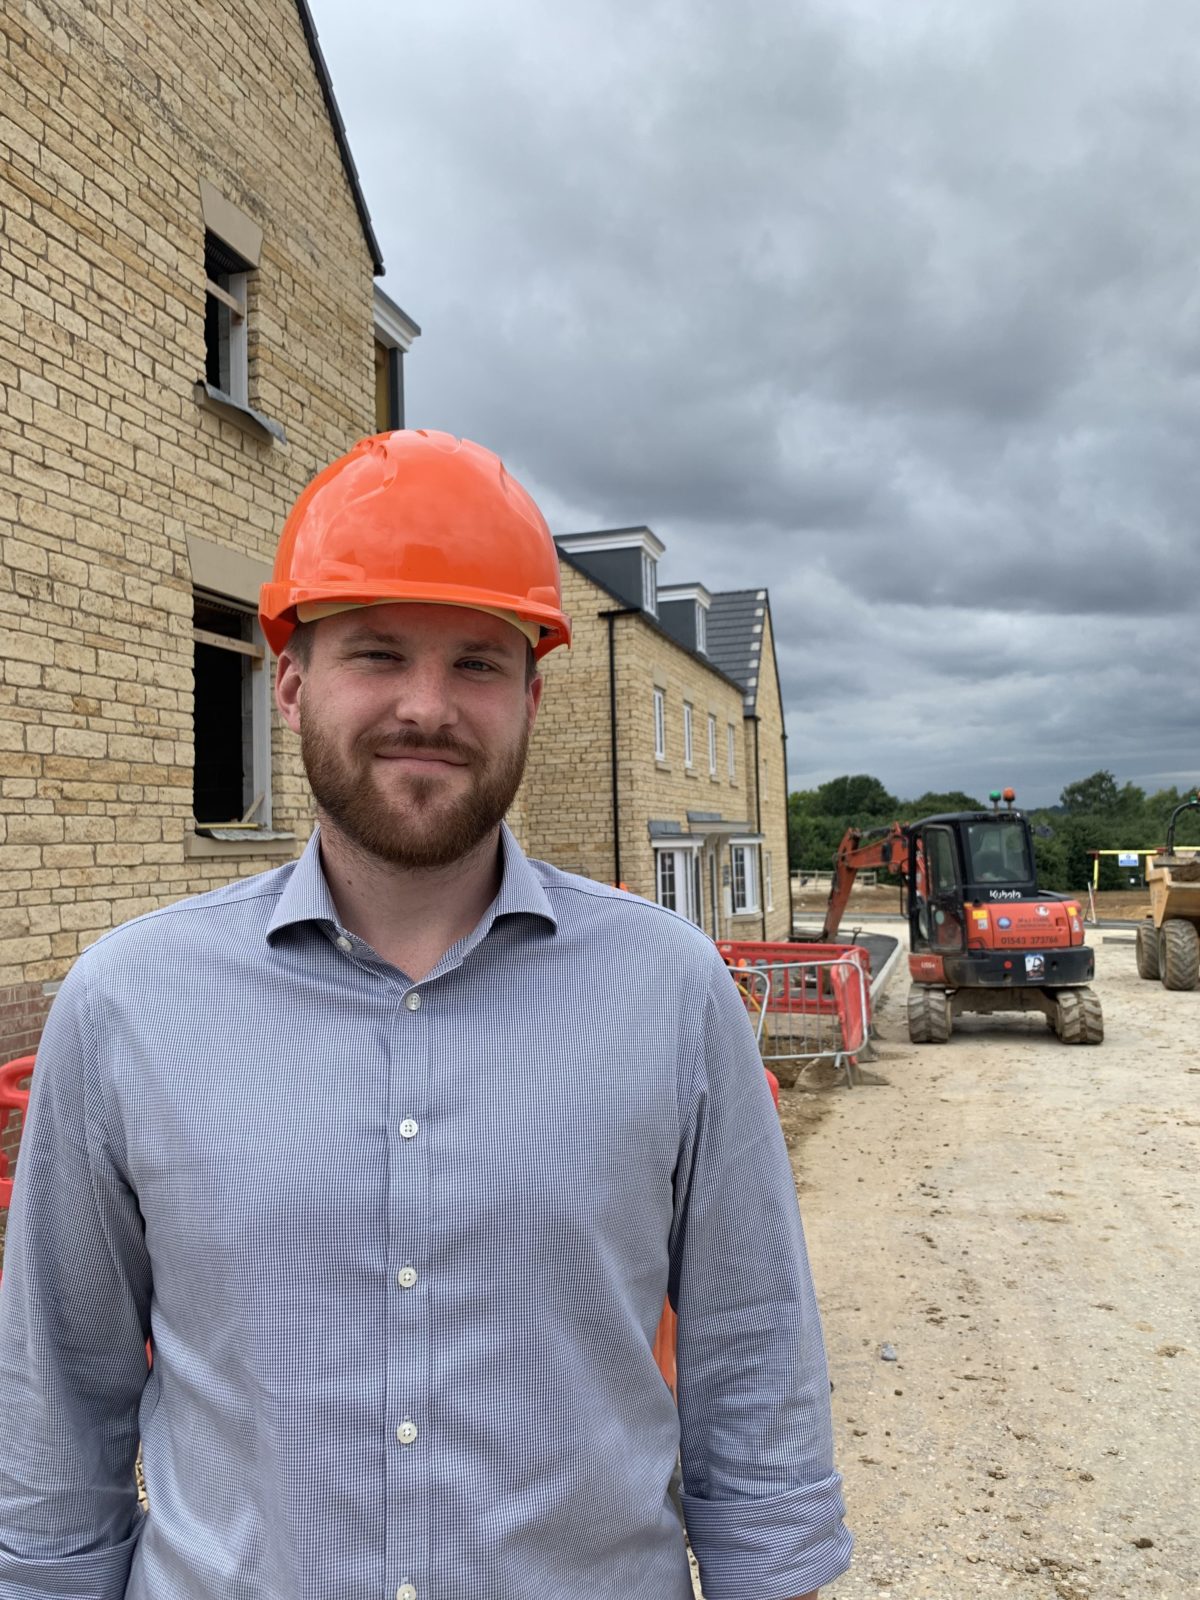 Luke Wiseman, manager at Whitley Stimpson in Witney